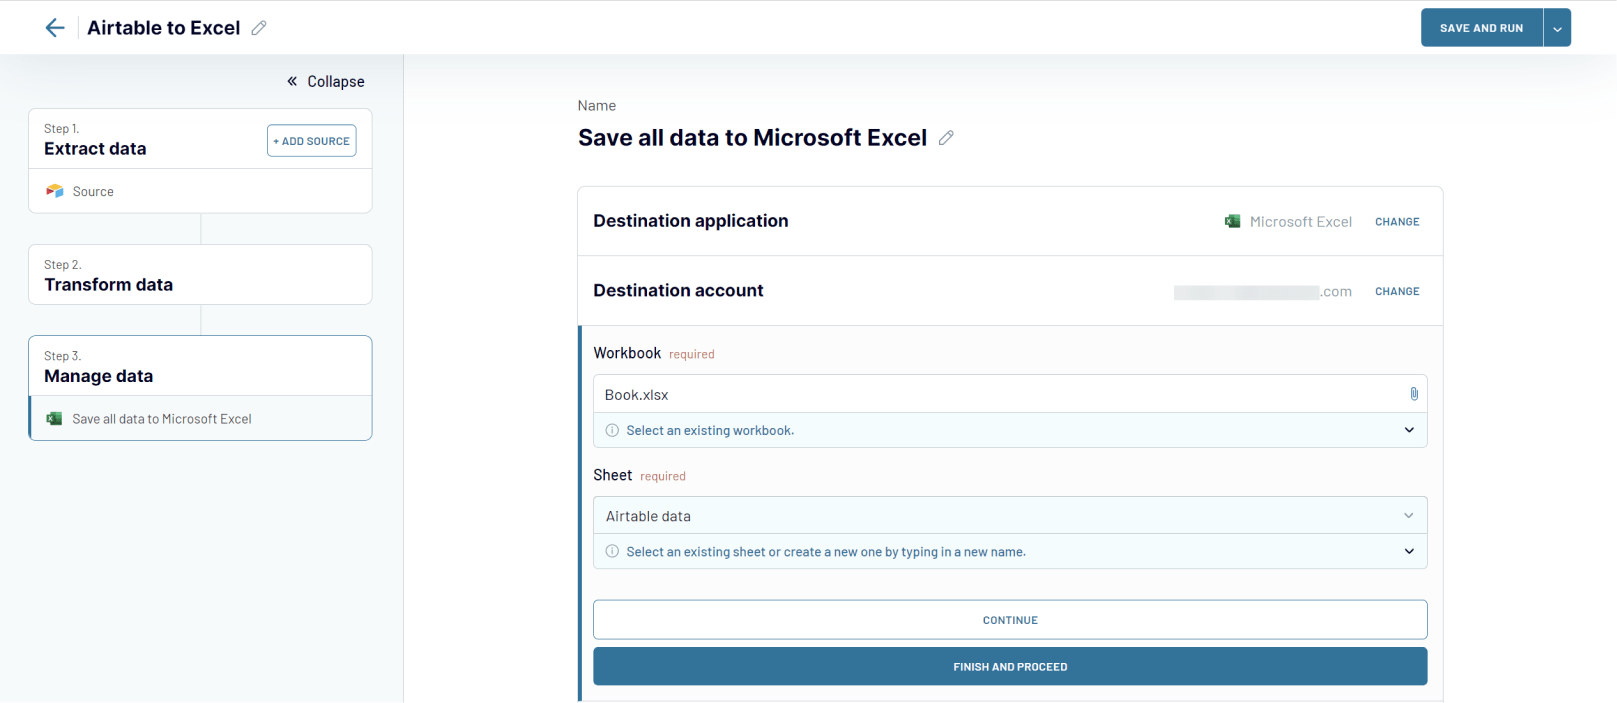 Manage Airtable data to load to Excel